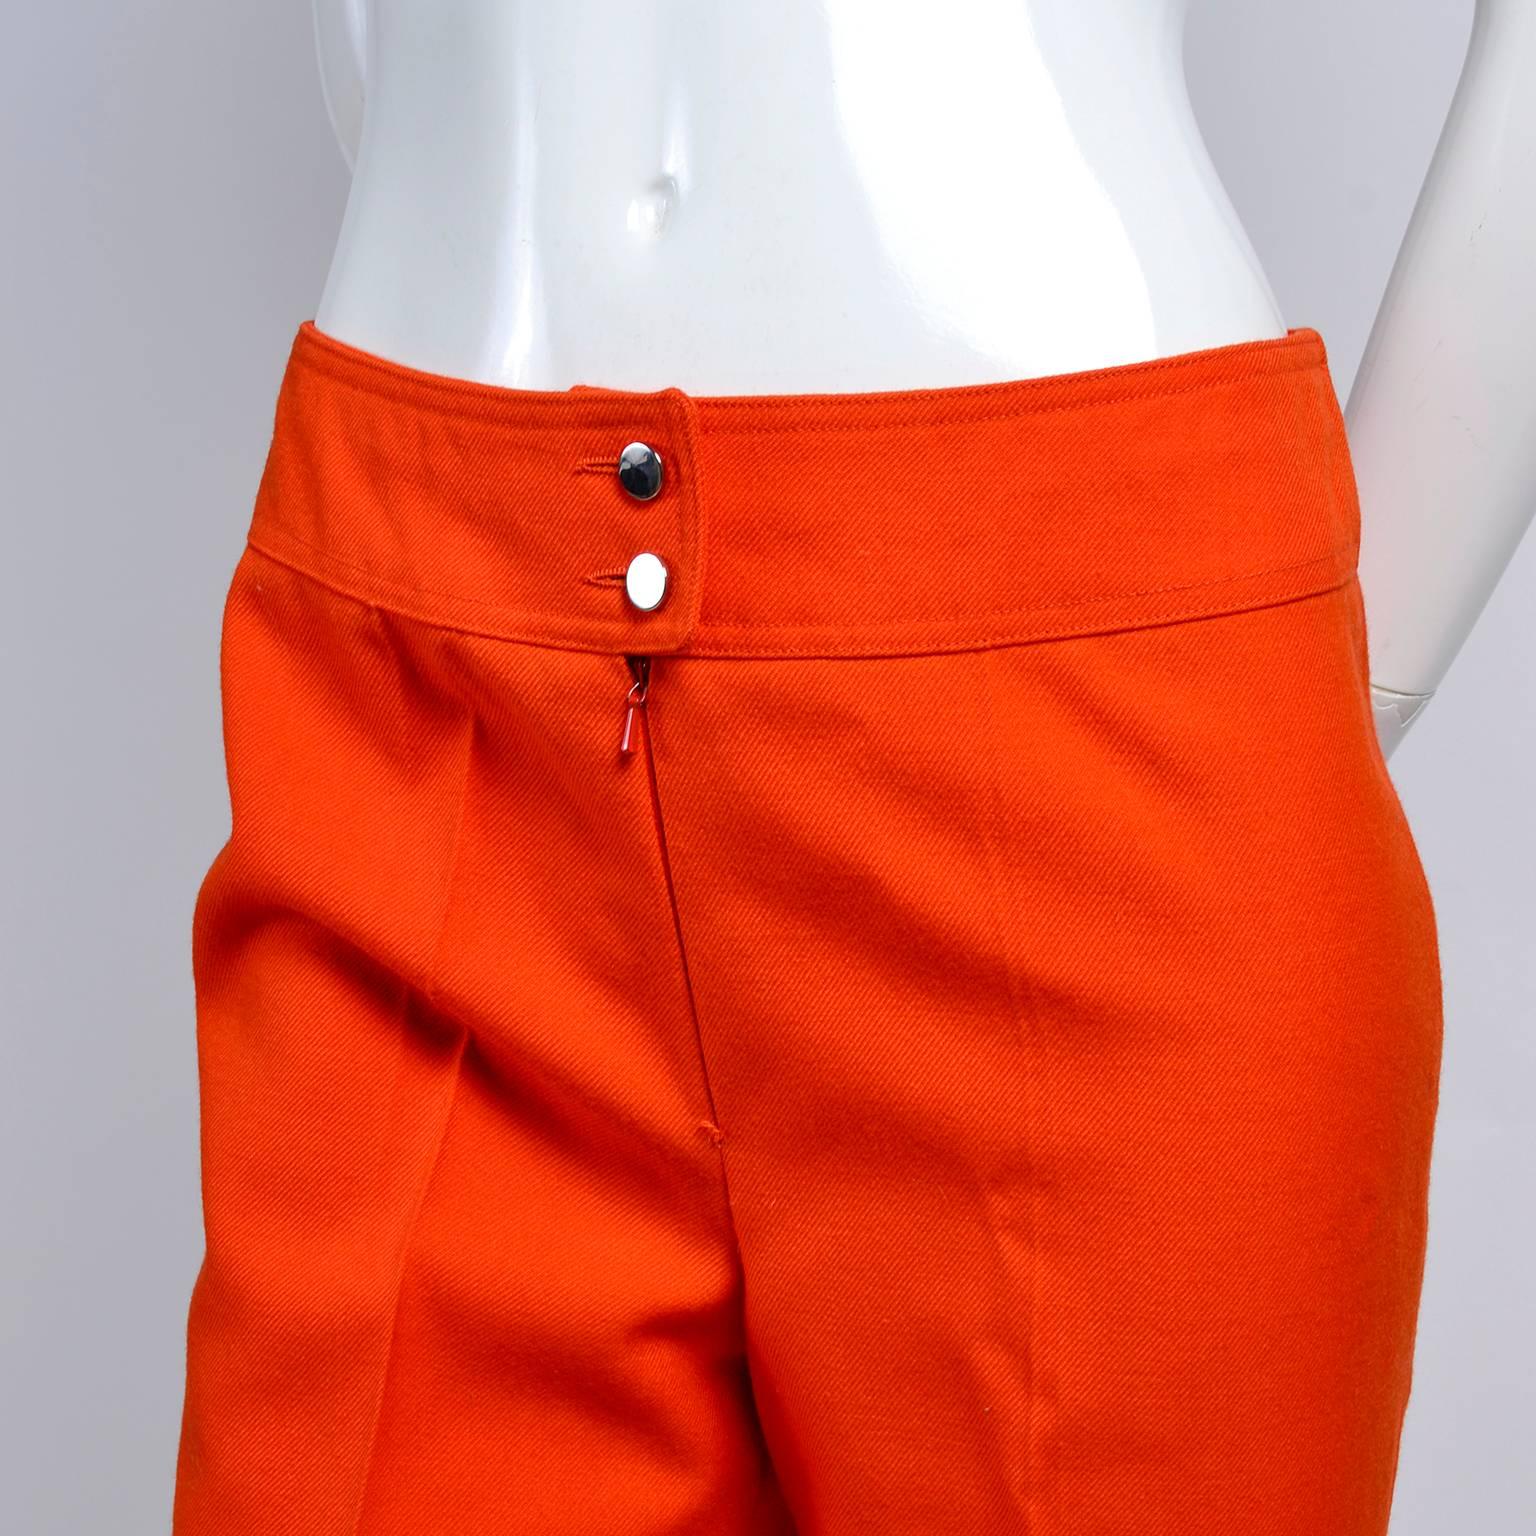 These are fabulous wool pants from Courreges Paris in a gorgeous, rich orange wool fabric.  These wool trousers are fully lined and have a zipper and two silver snap closure in front. There are no pockets, but there is a unique panel in the back. We